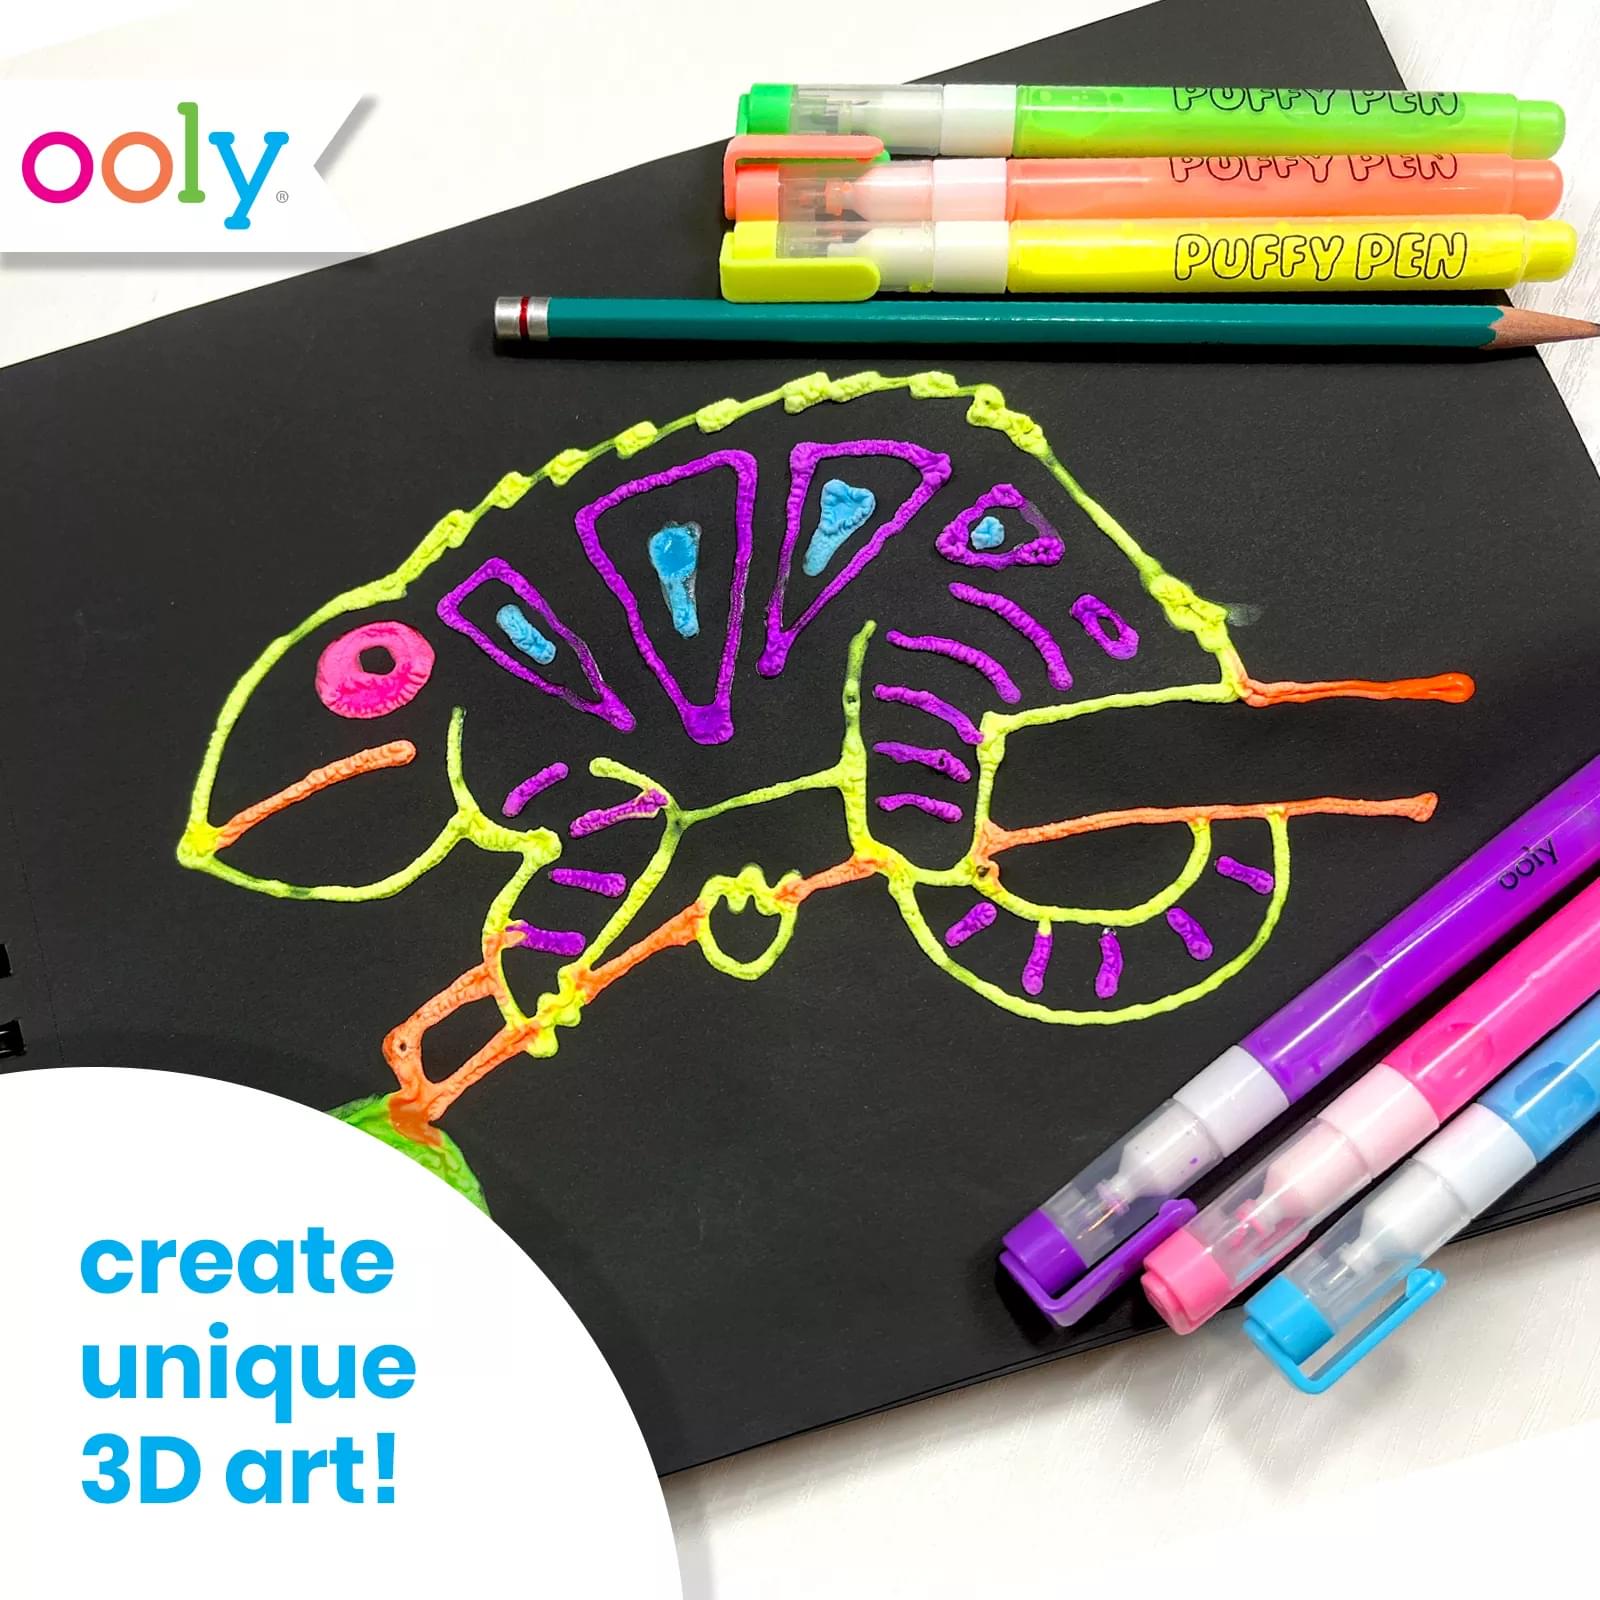 Magic Puffy Pens, Magic pens that puff up! Check out 5 ways to create 3D  art using Magic Puffy pens, over on our blog! bit.ly/puffypens, By OOLY